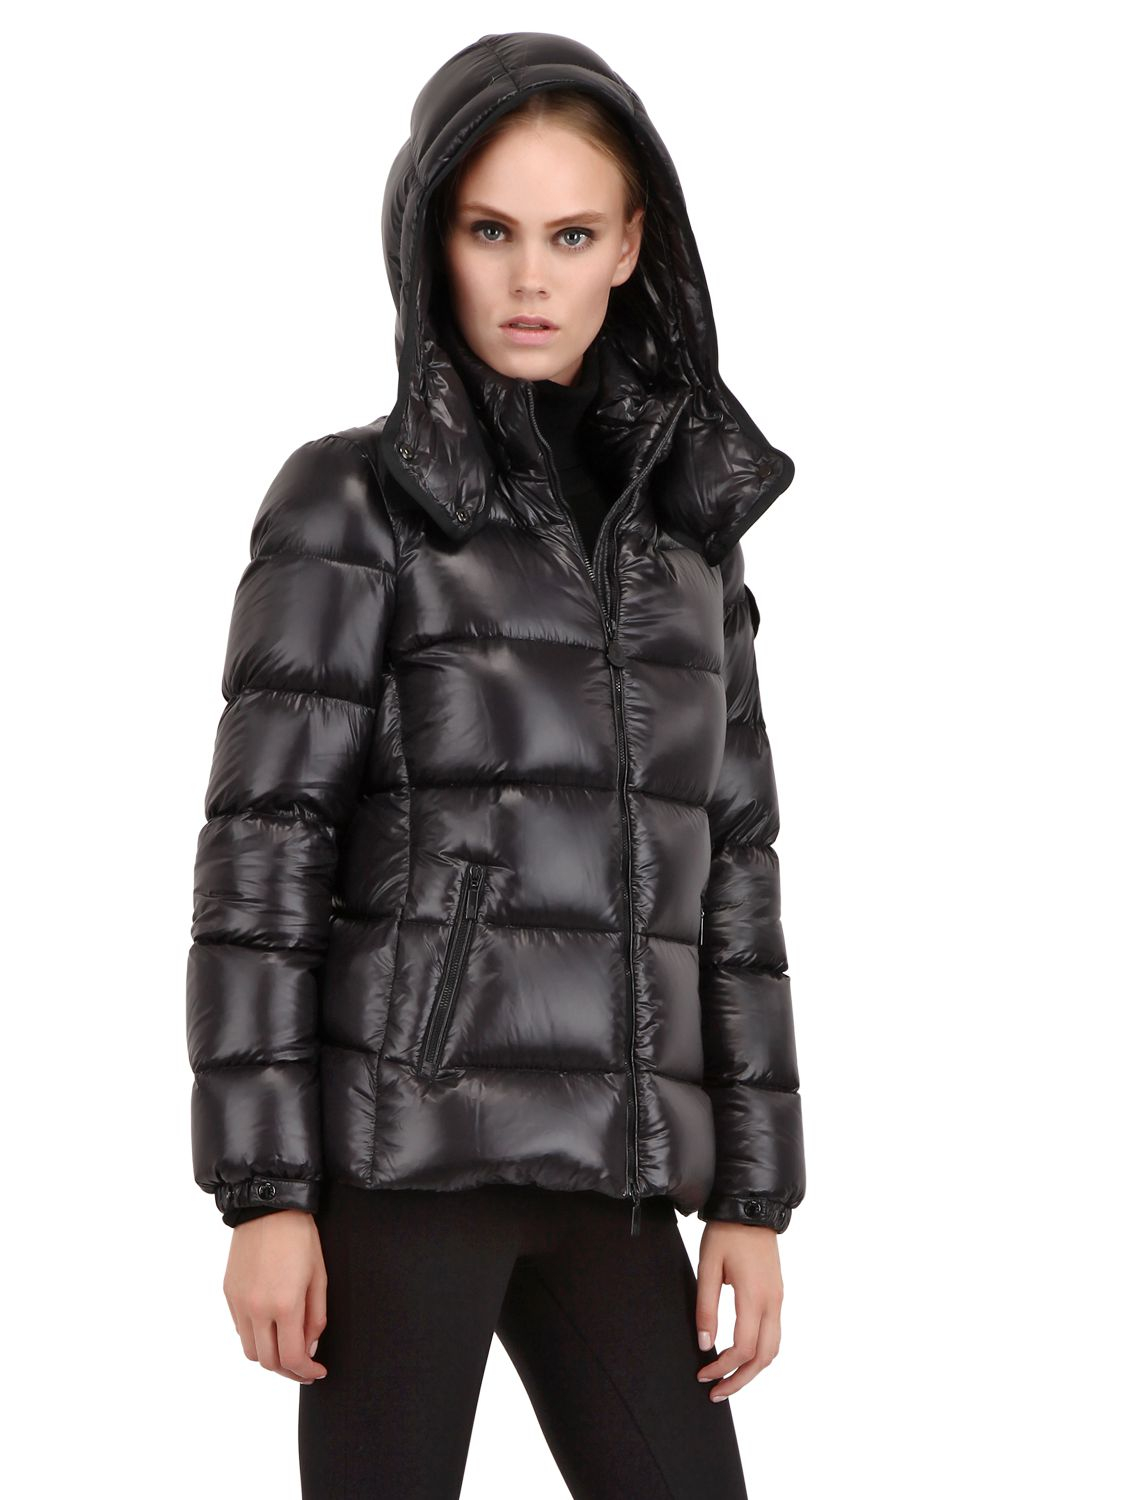 Lyst - Moncler Bady Quilted Nylon Down Jacket in Black for Men